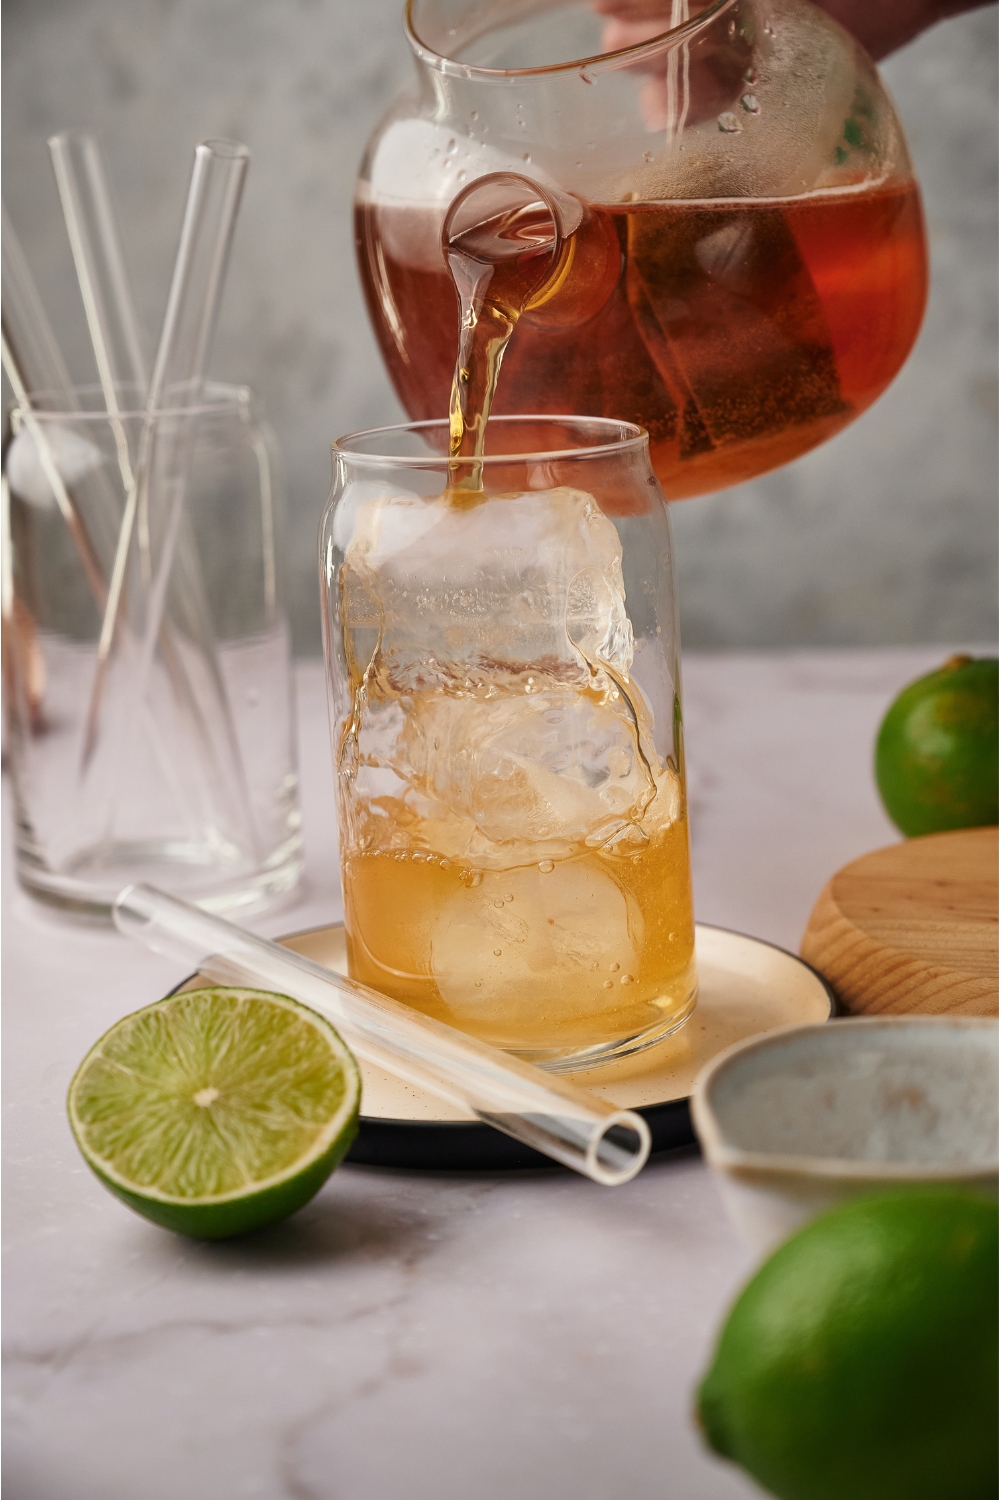 A glass filled with ice and a teapot pouring tea into the glass. There is a straw and a halved lime next to the glass.